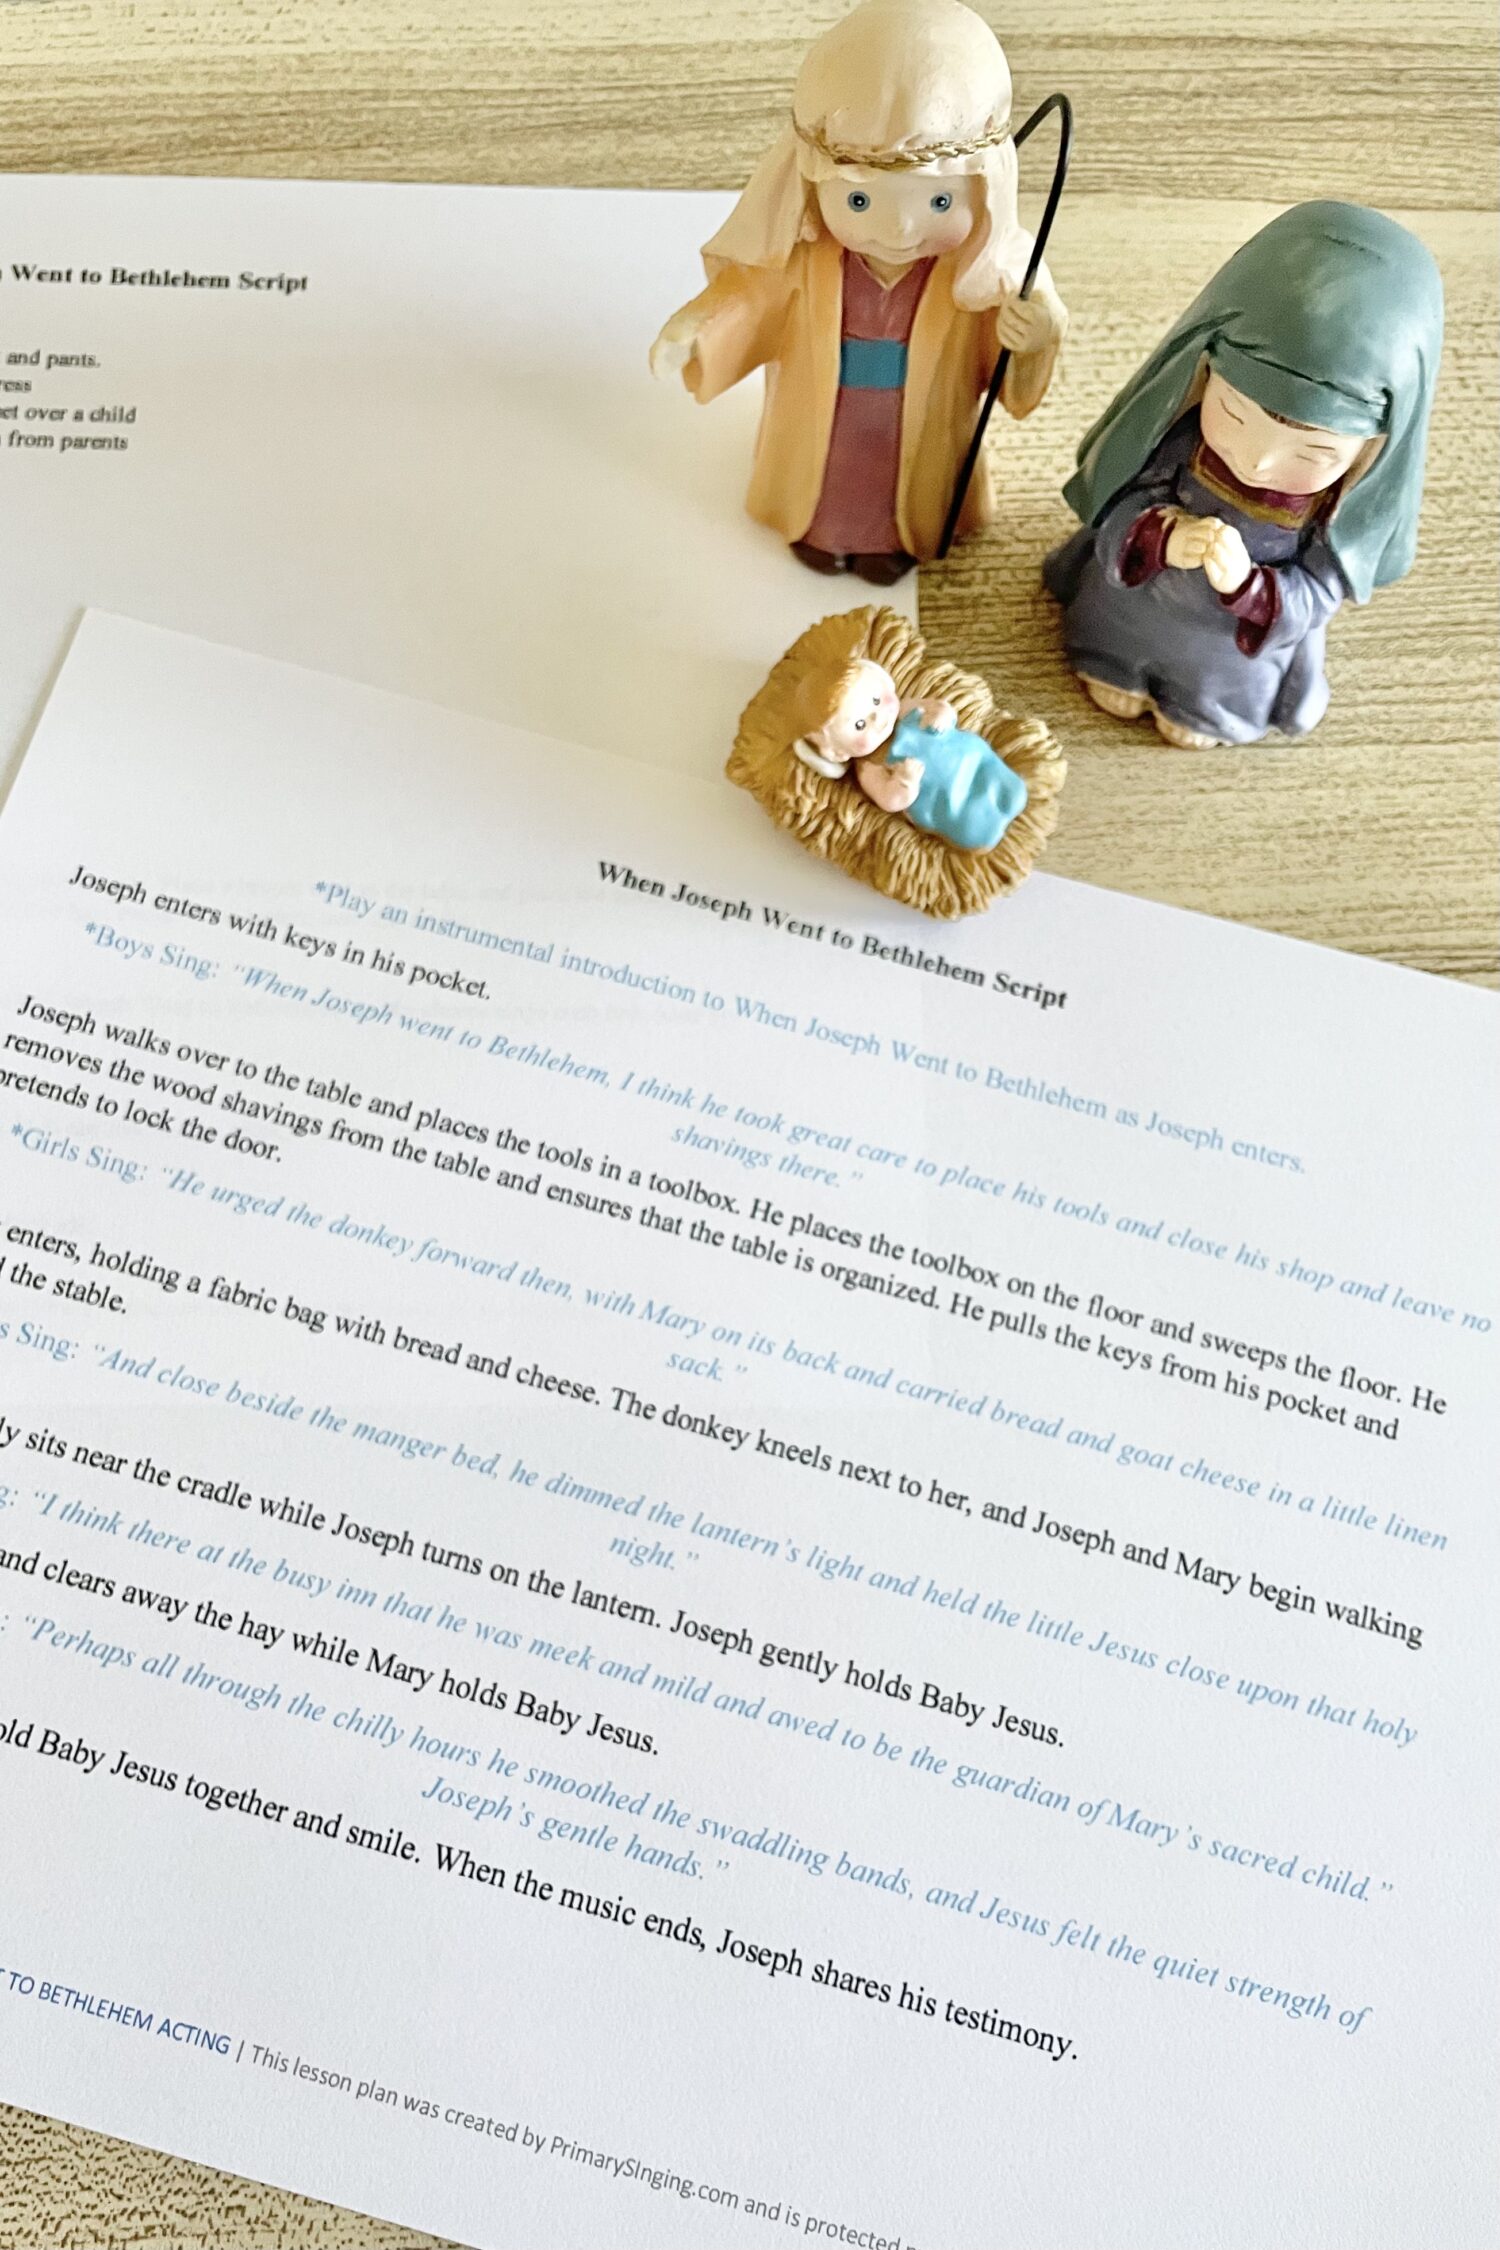 When Joseph Went to Bethlehem Acting - use this simple script to act out this Christmas song in primary or share with your ward. Includes printable script with costumes ideas, props, and additional song helps for LDS Primary Music Leaders.